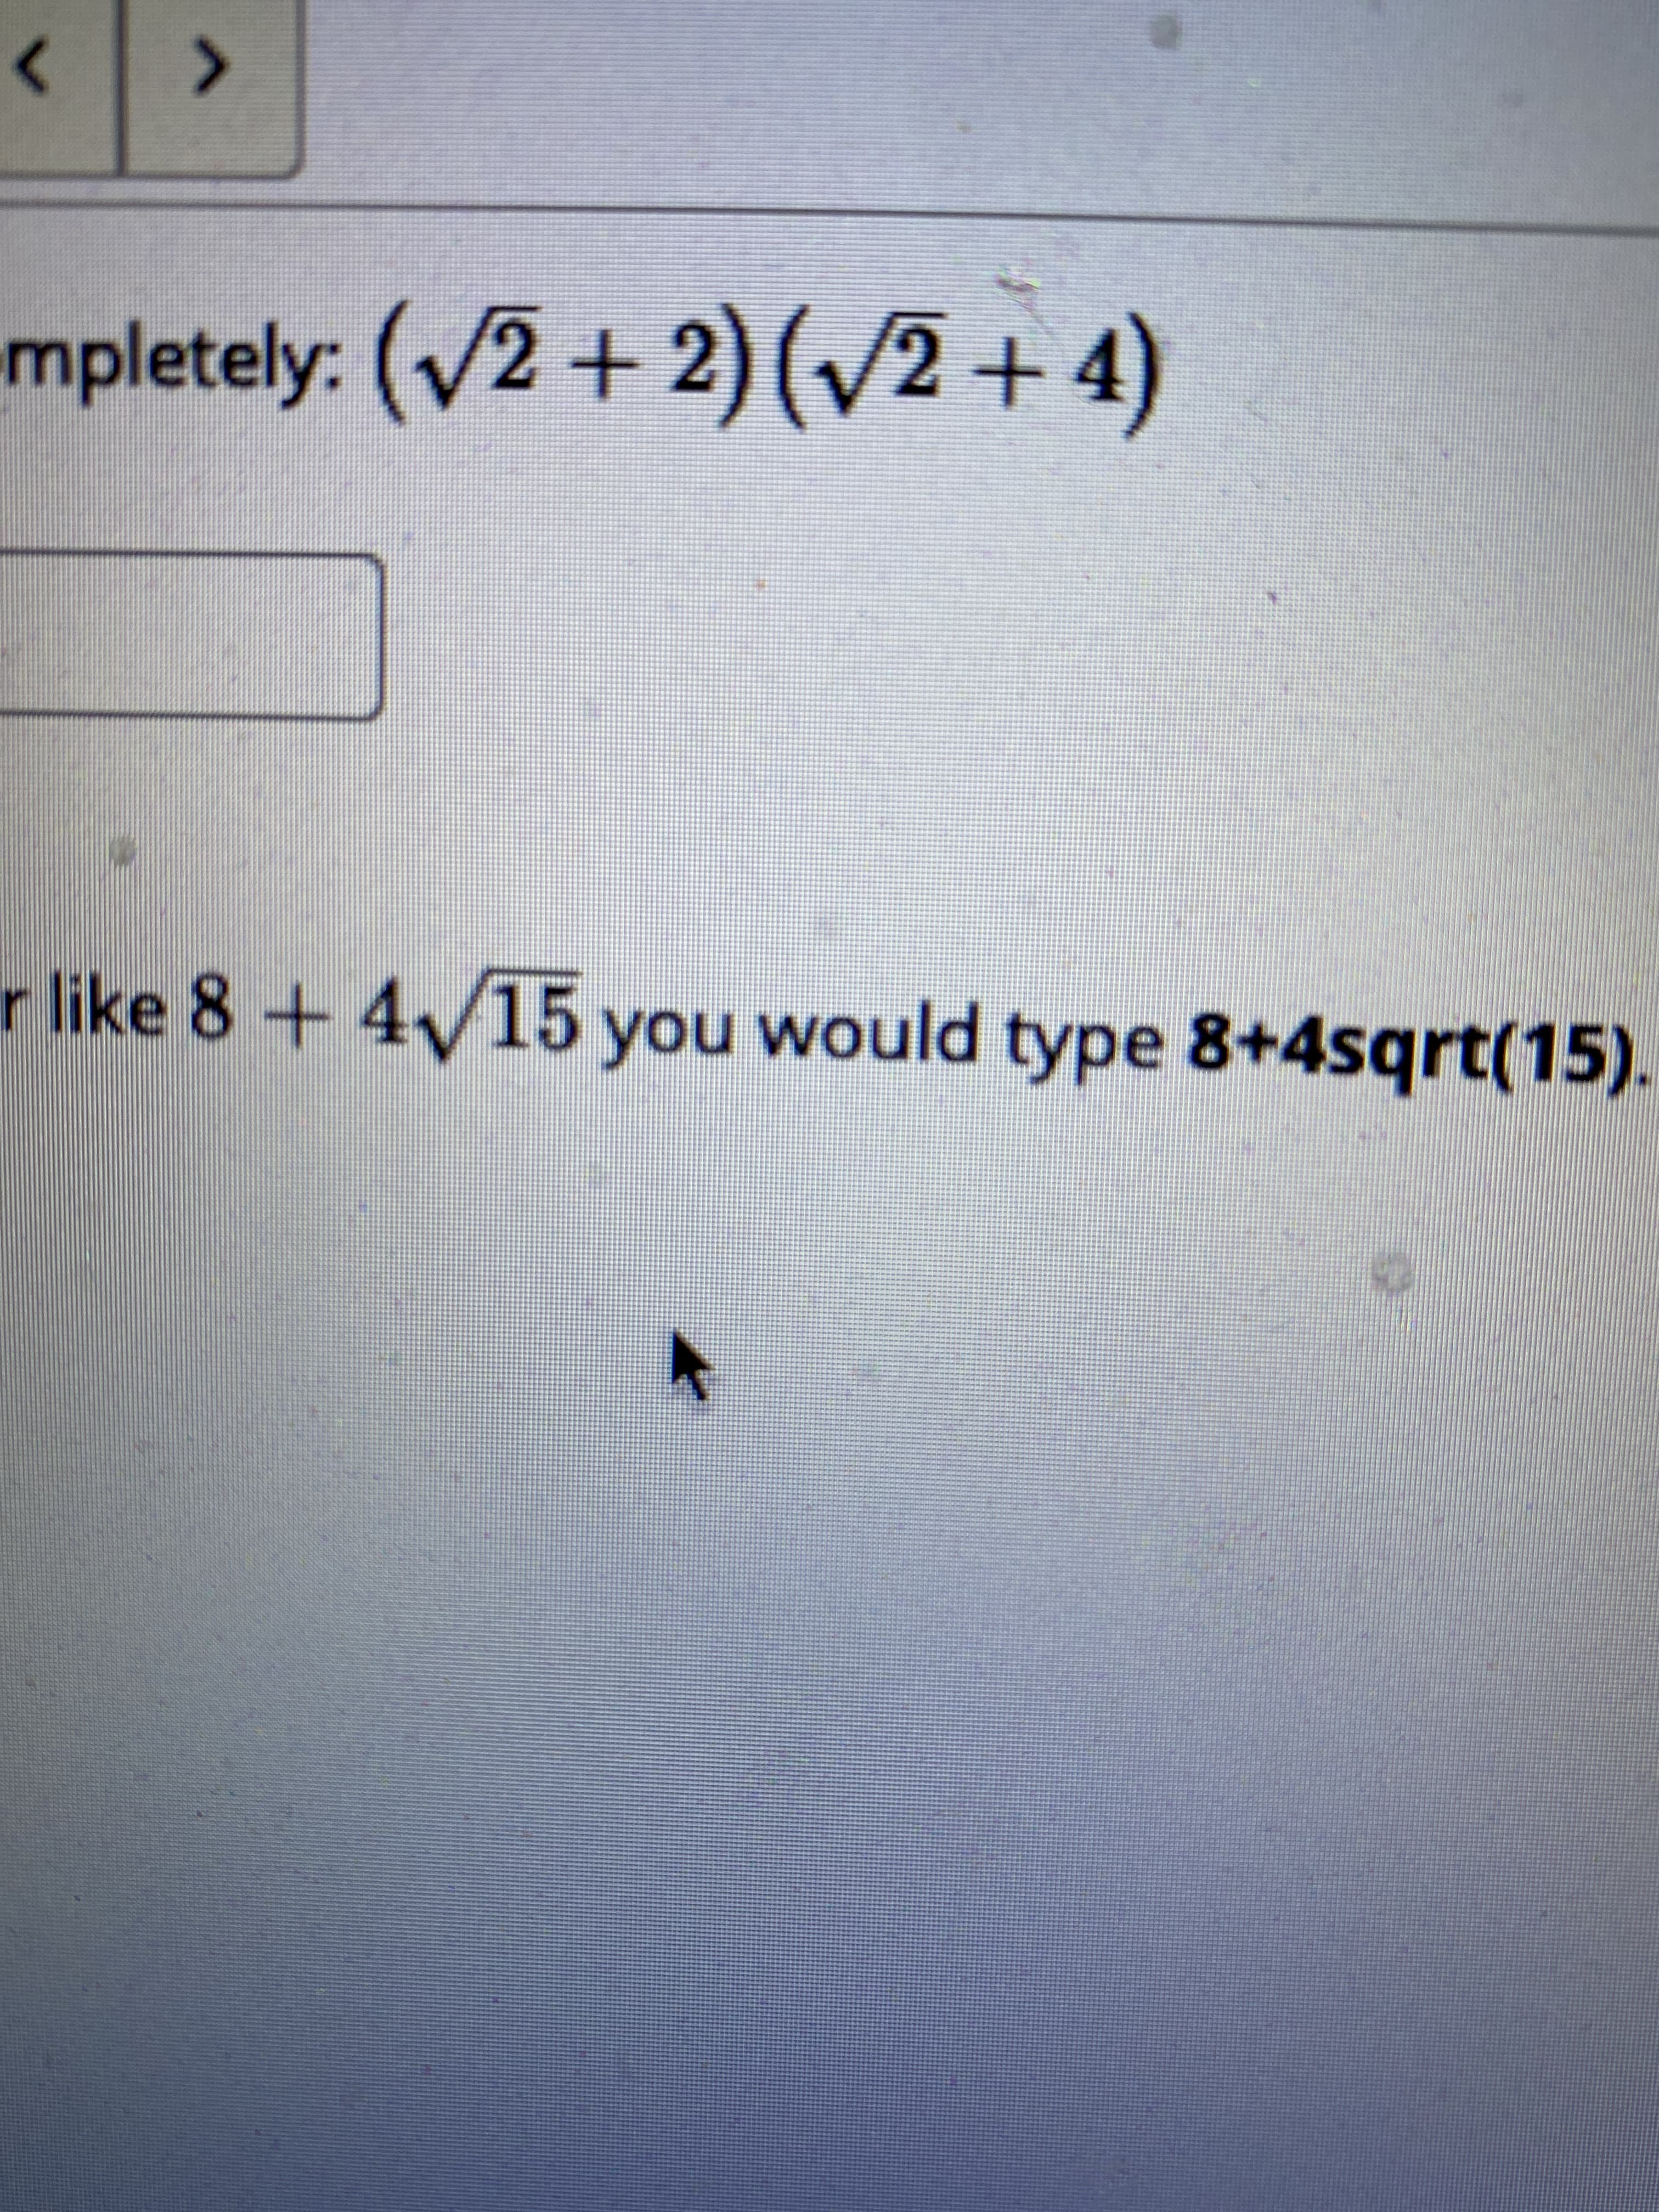 >
mpletely: (V2 + 2) (/2 + 4)
r like 8+4/15 you would type 8+4sqrt(15).
